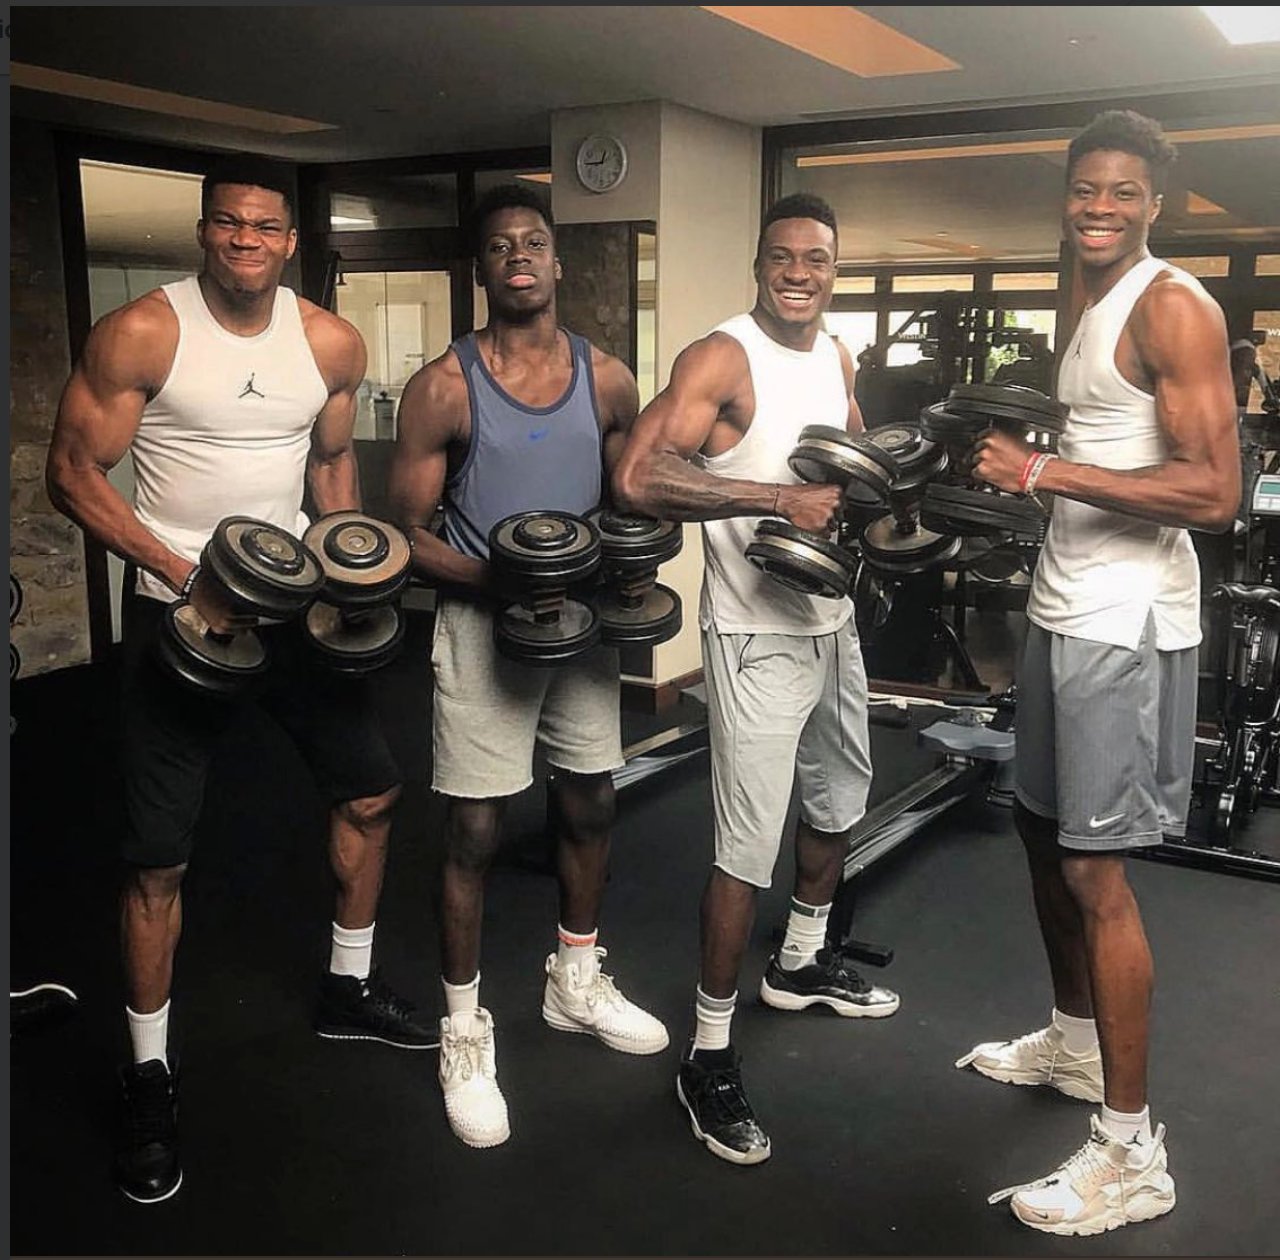 Bryan Kalbrosky On Twitter Everyone Is Talking About How Ripped Giannis Antetokounmpo Looks In This Photo He Posted On Instagram But The Main Takeaway Here Should Be His Youngest Brother Alex This